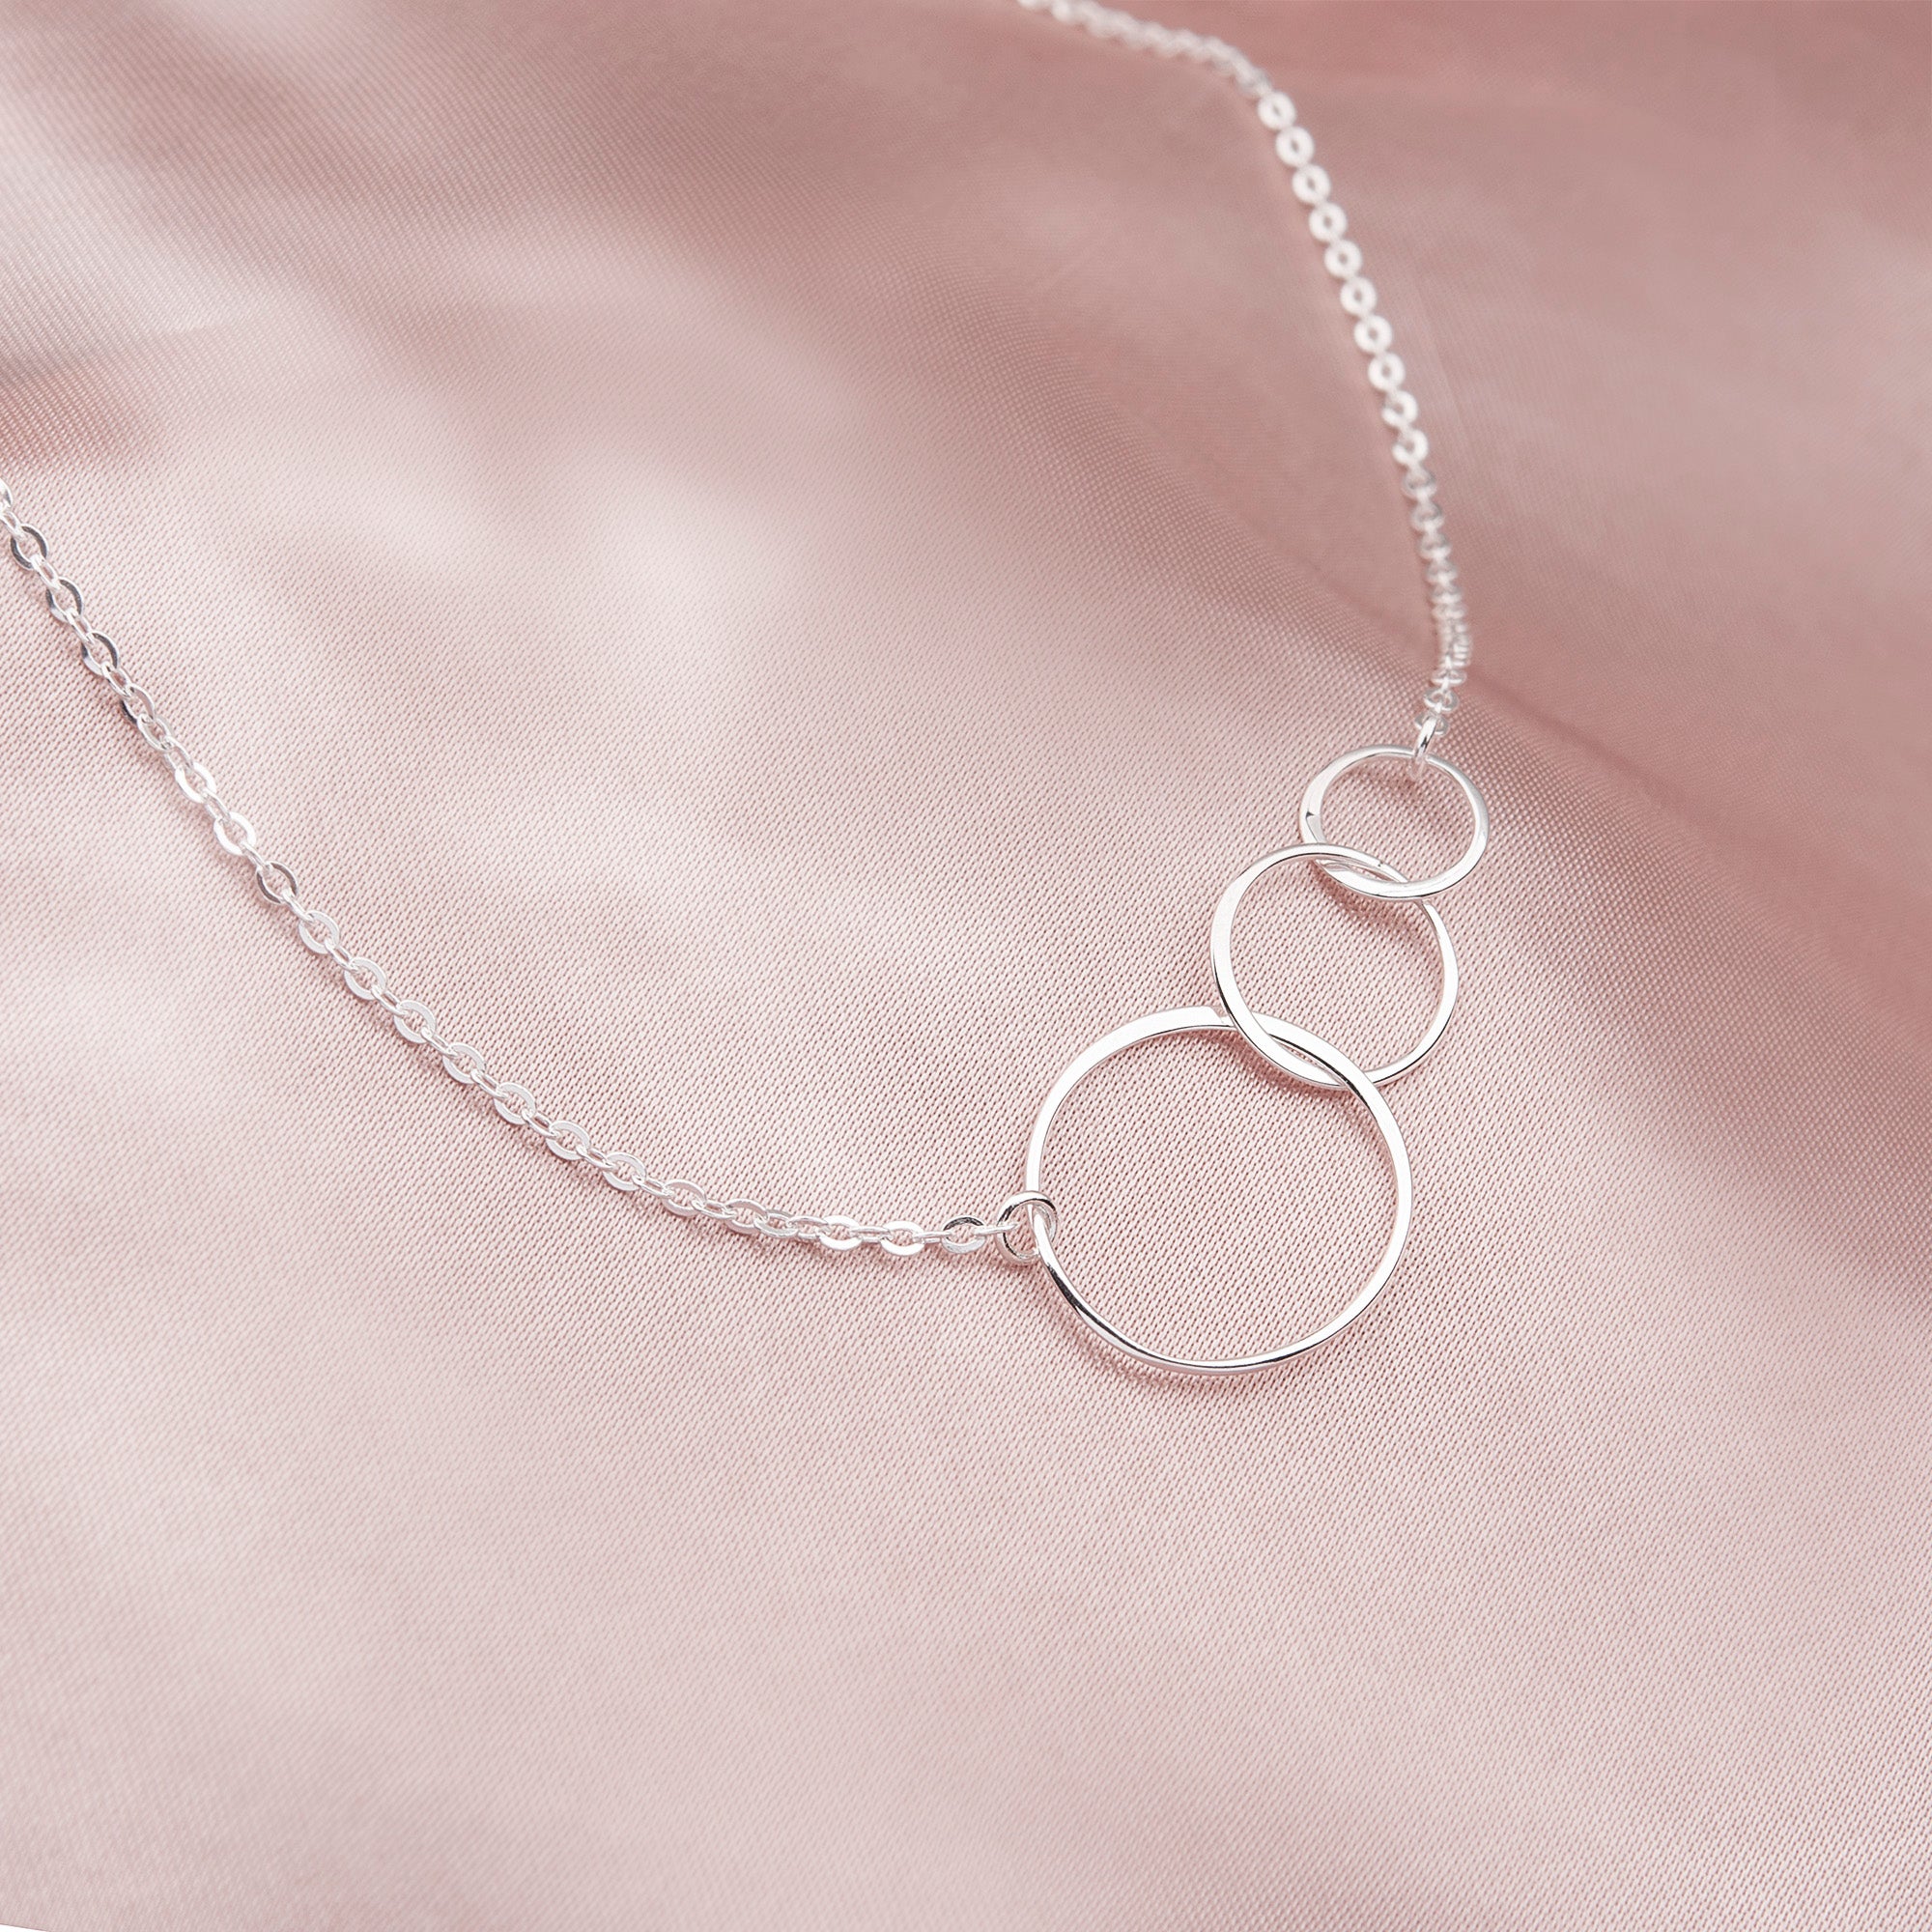 Anavia Birthday Gift for Girlfriend, Double Circle Necklace